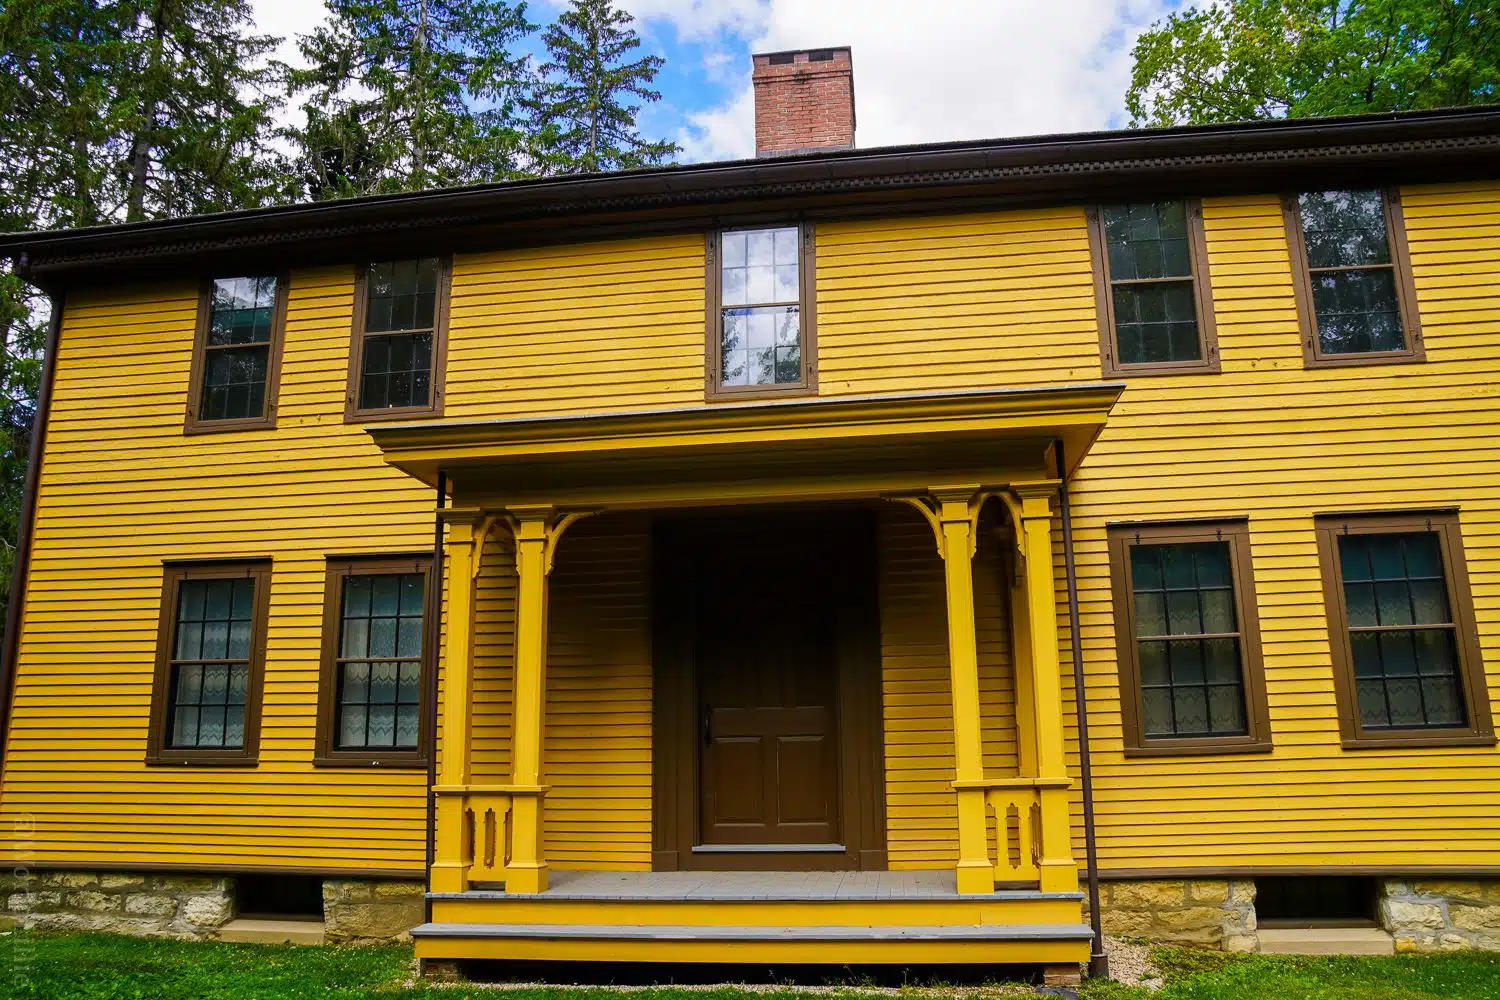 Where Herman Melville Wrote Moby Dick: Arrowhead, Pittsfield, MA